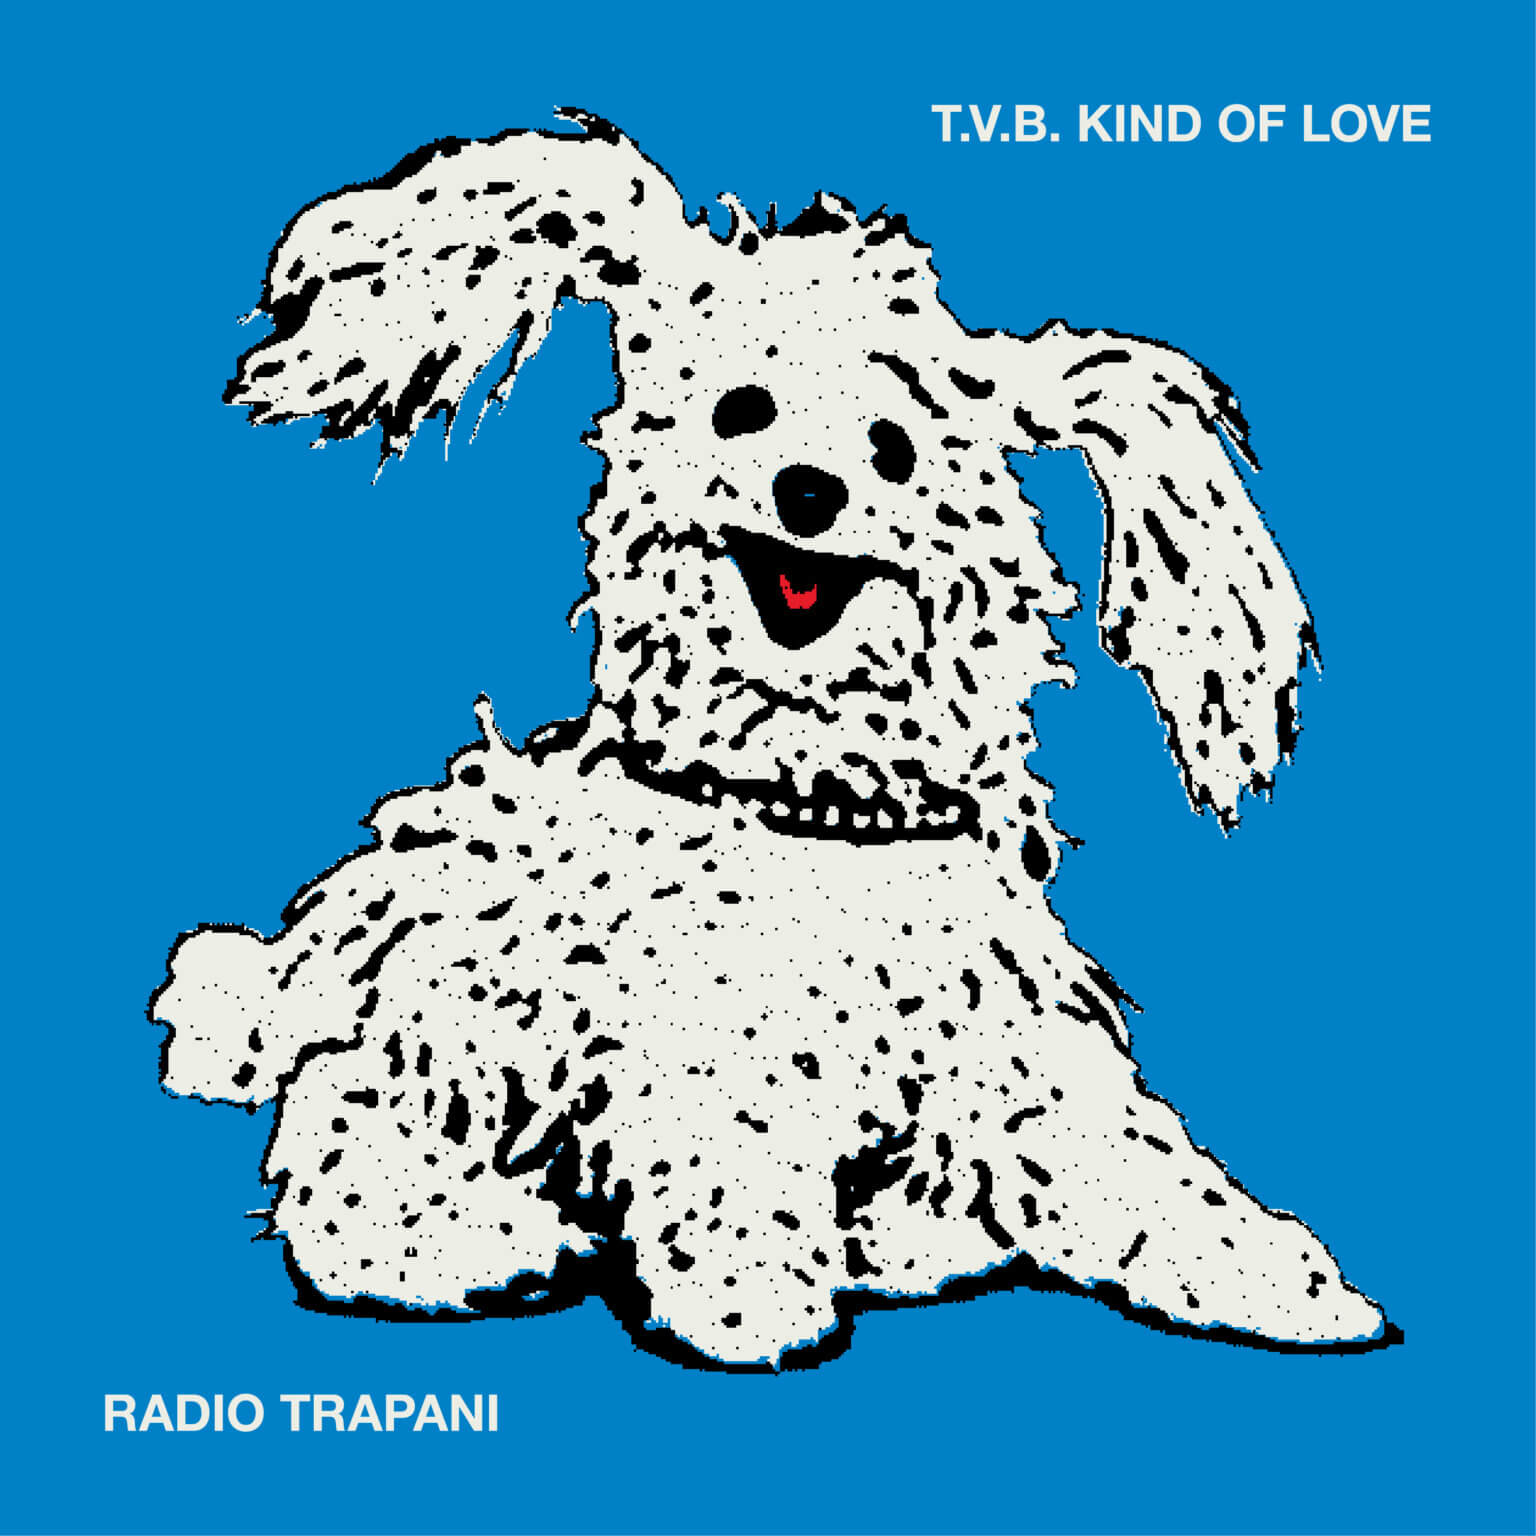 T.V.B. kind of love is the new concept album by Radio Trapani, now available via streaming platforms via Spazio Dischi